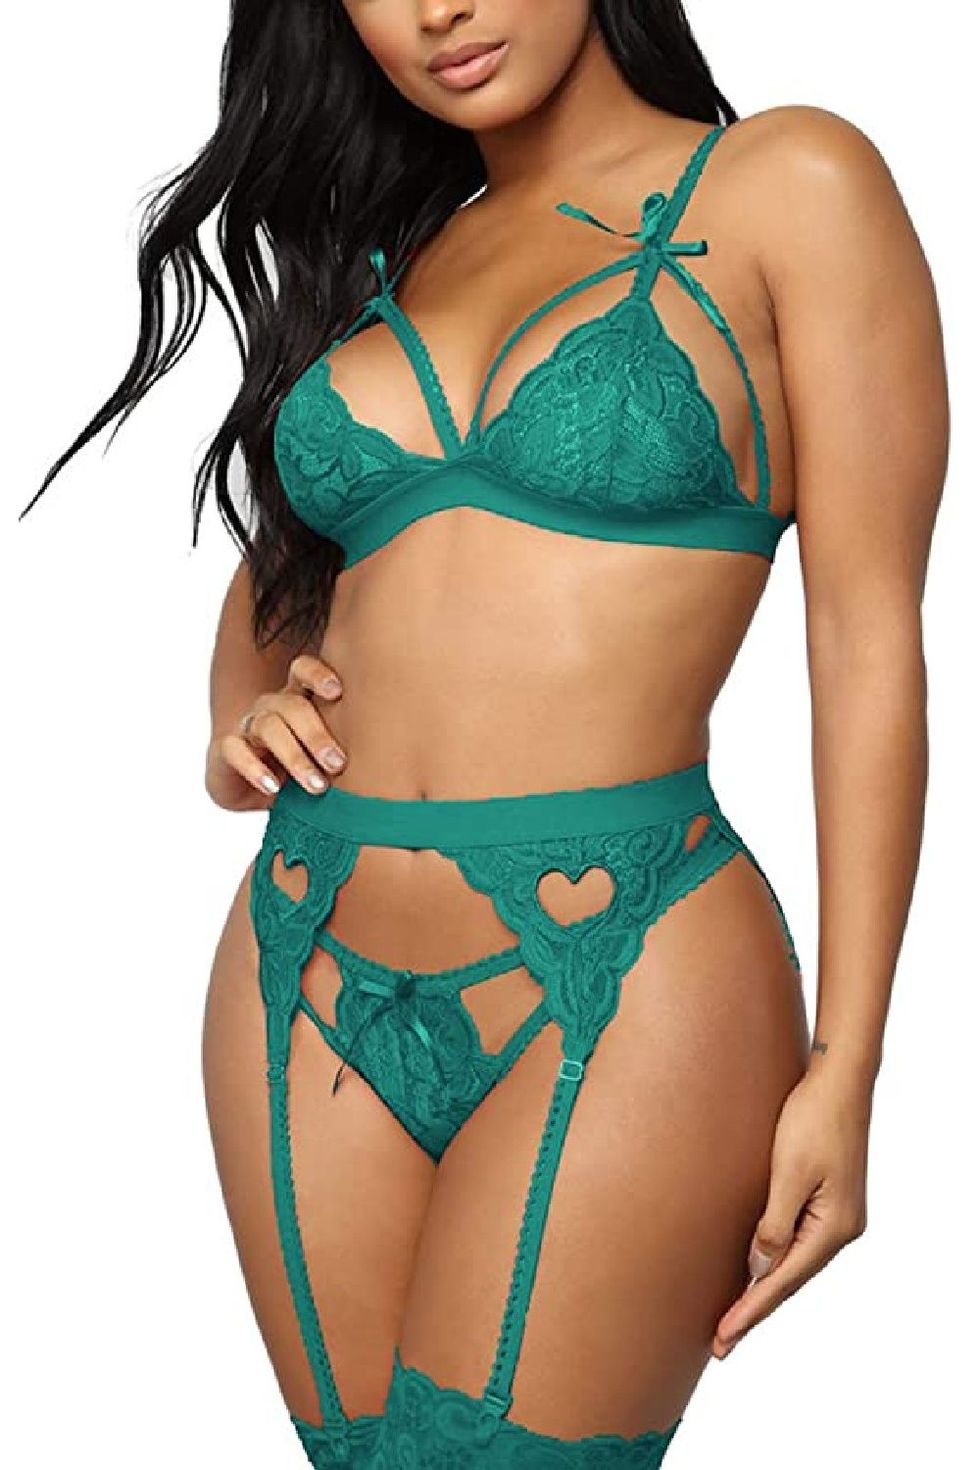 Buy Green Lace Lingerie Set, Green Lace Lingerie, Sexy Lingerie, Suspender  Belt, Green Lingerie, Sexy Lingerie Set Valentine's Day Online in India 